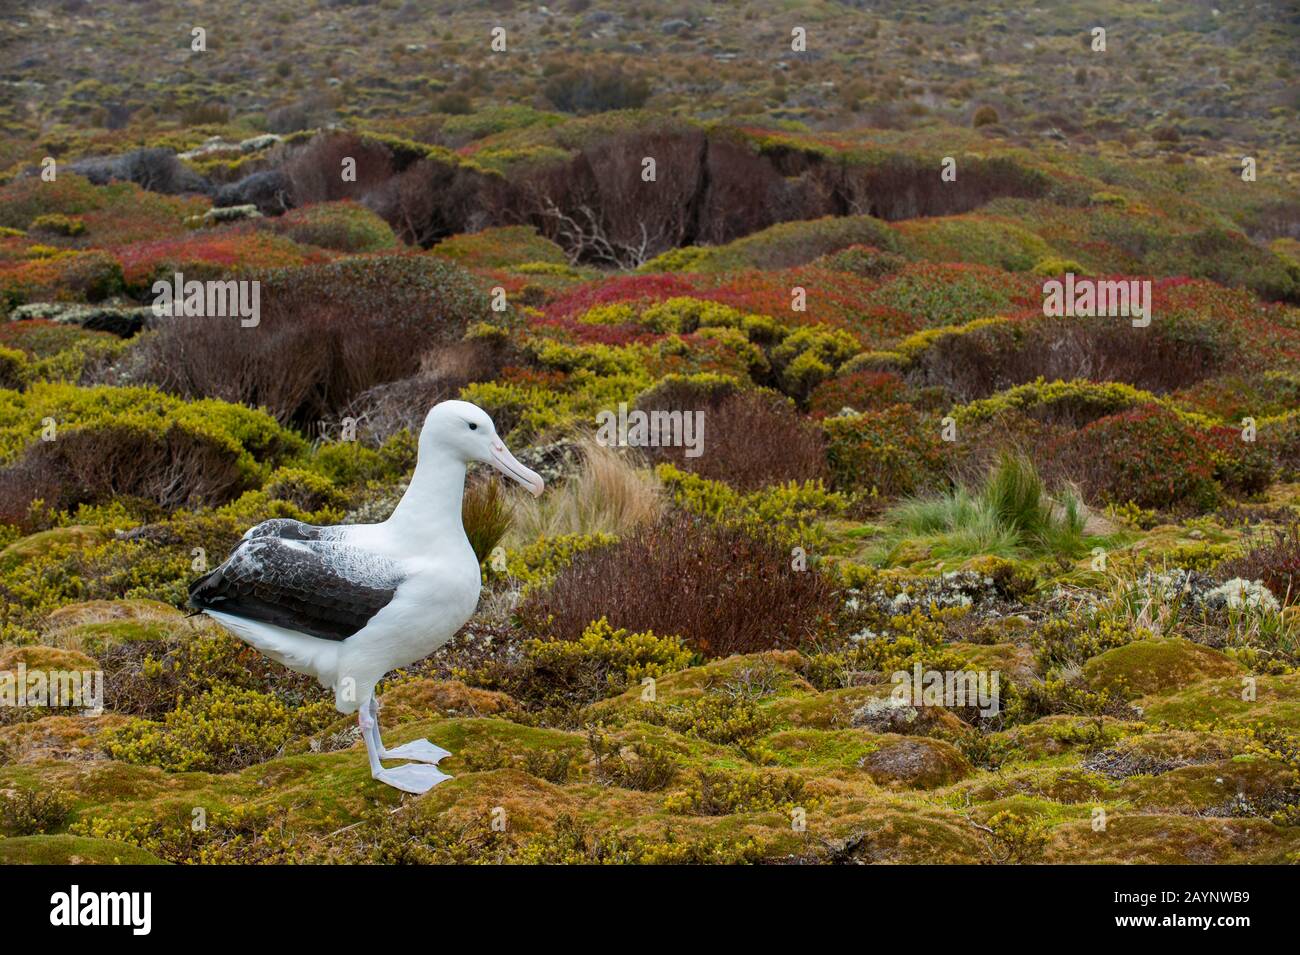 A southern royal albatross (Diomedea epomophora) on Enderby Island, a sub-Antarctic Island in the Auckland Island group, New Zealand. Stock Photo